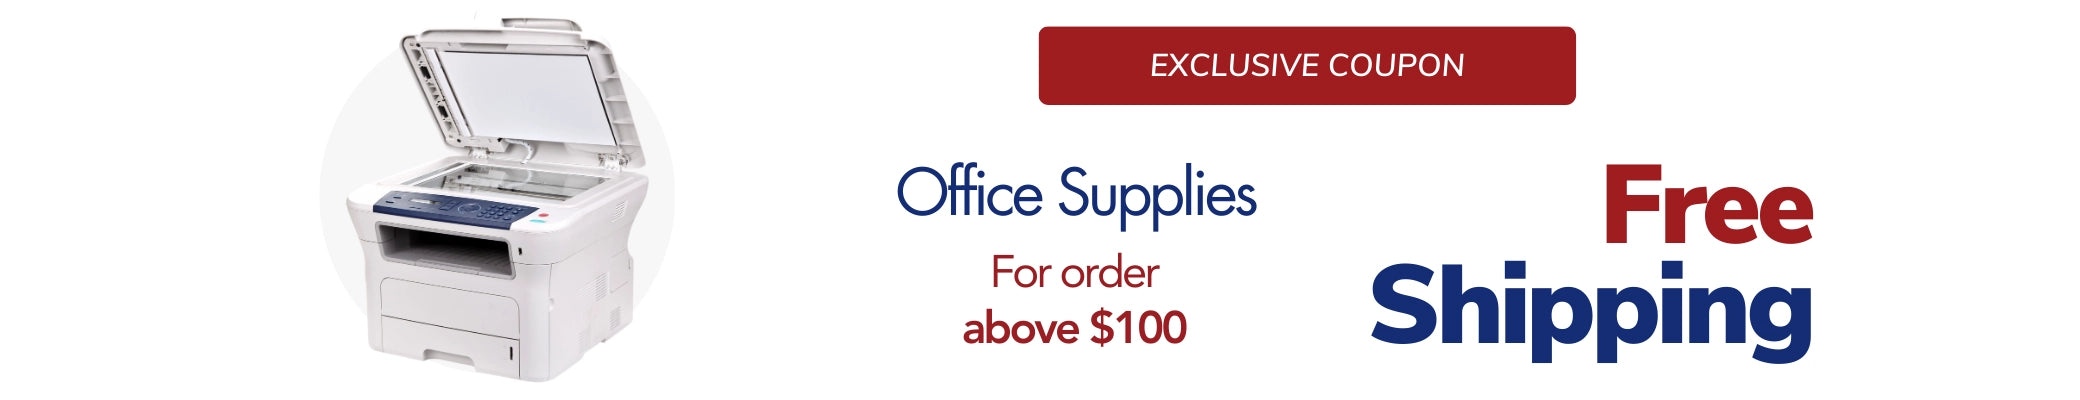 Printer, binders and more office supplies with free shipping for order above 100